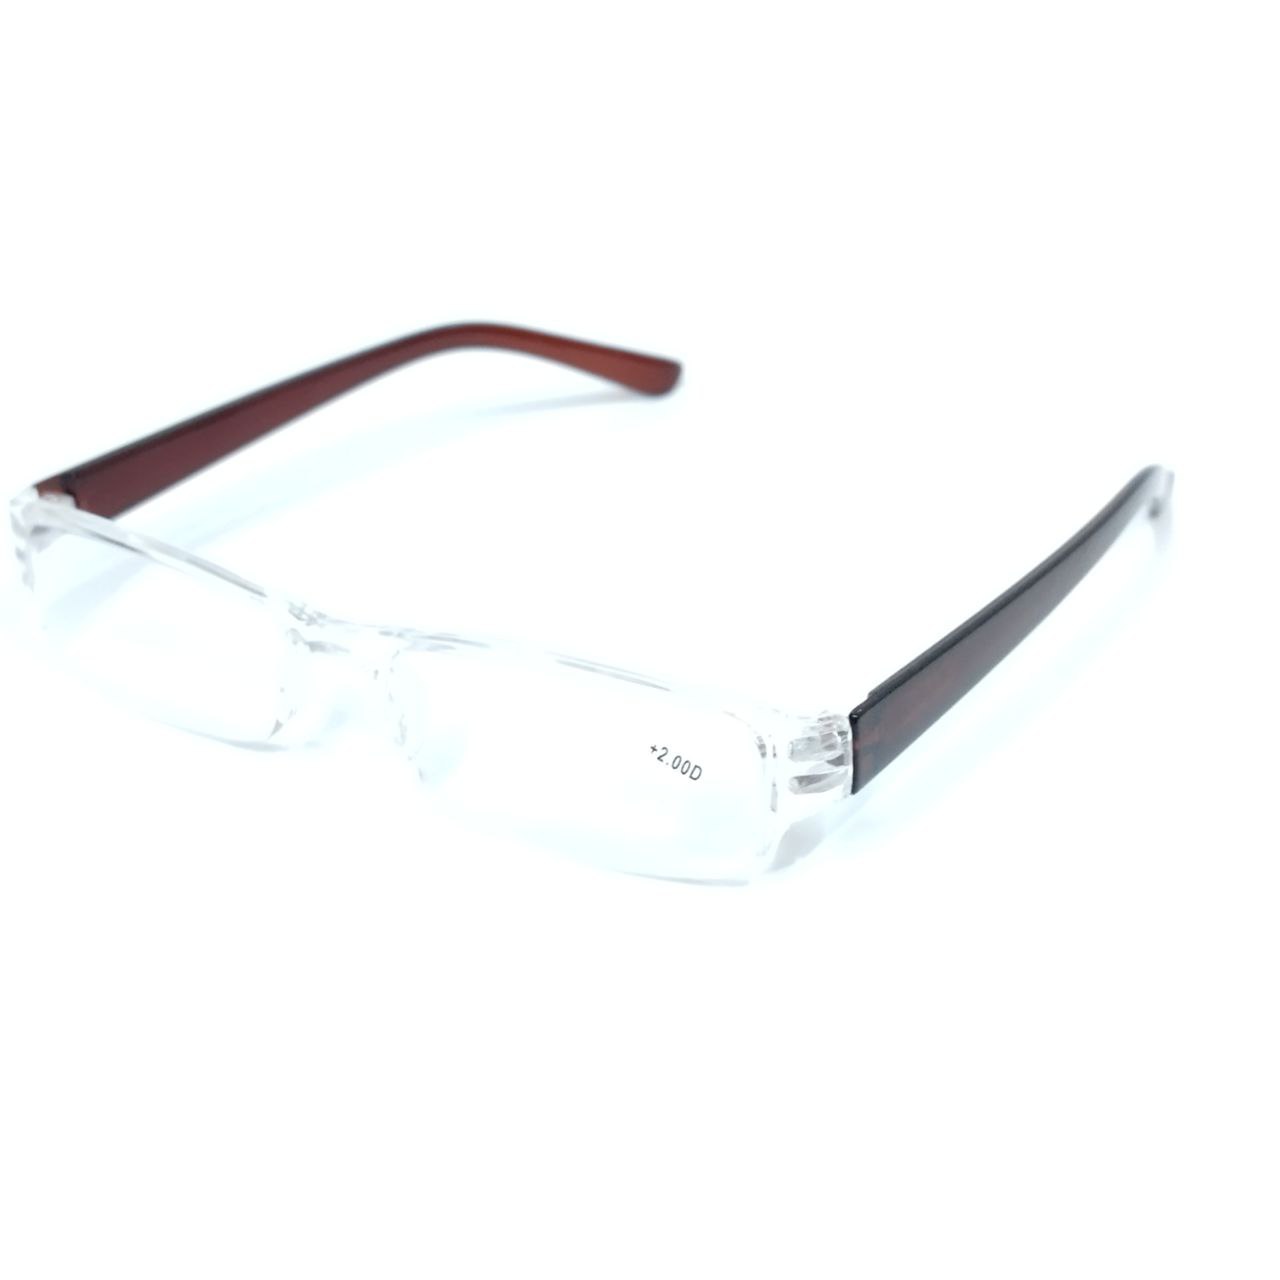 Compact Supra Reading Glasses in Brown Color - Perfect for On-the-Go